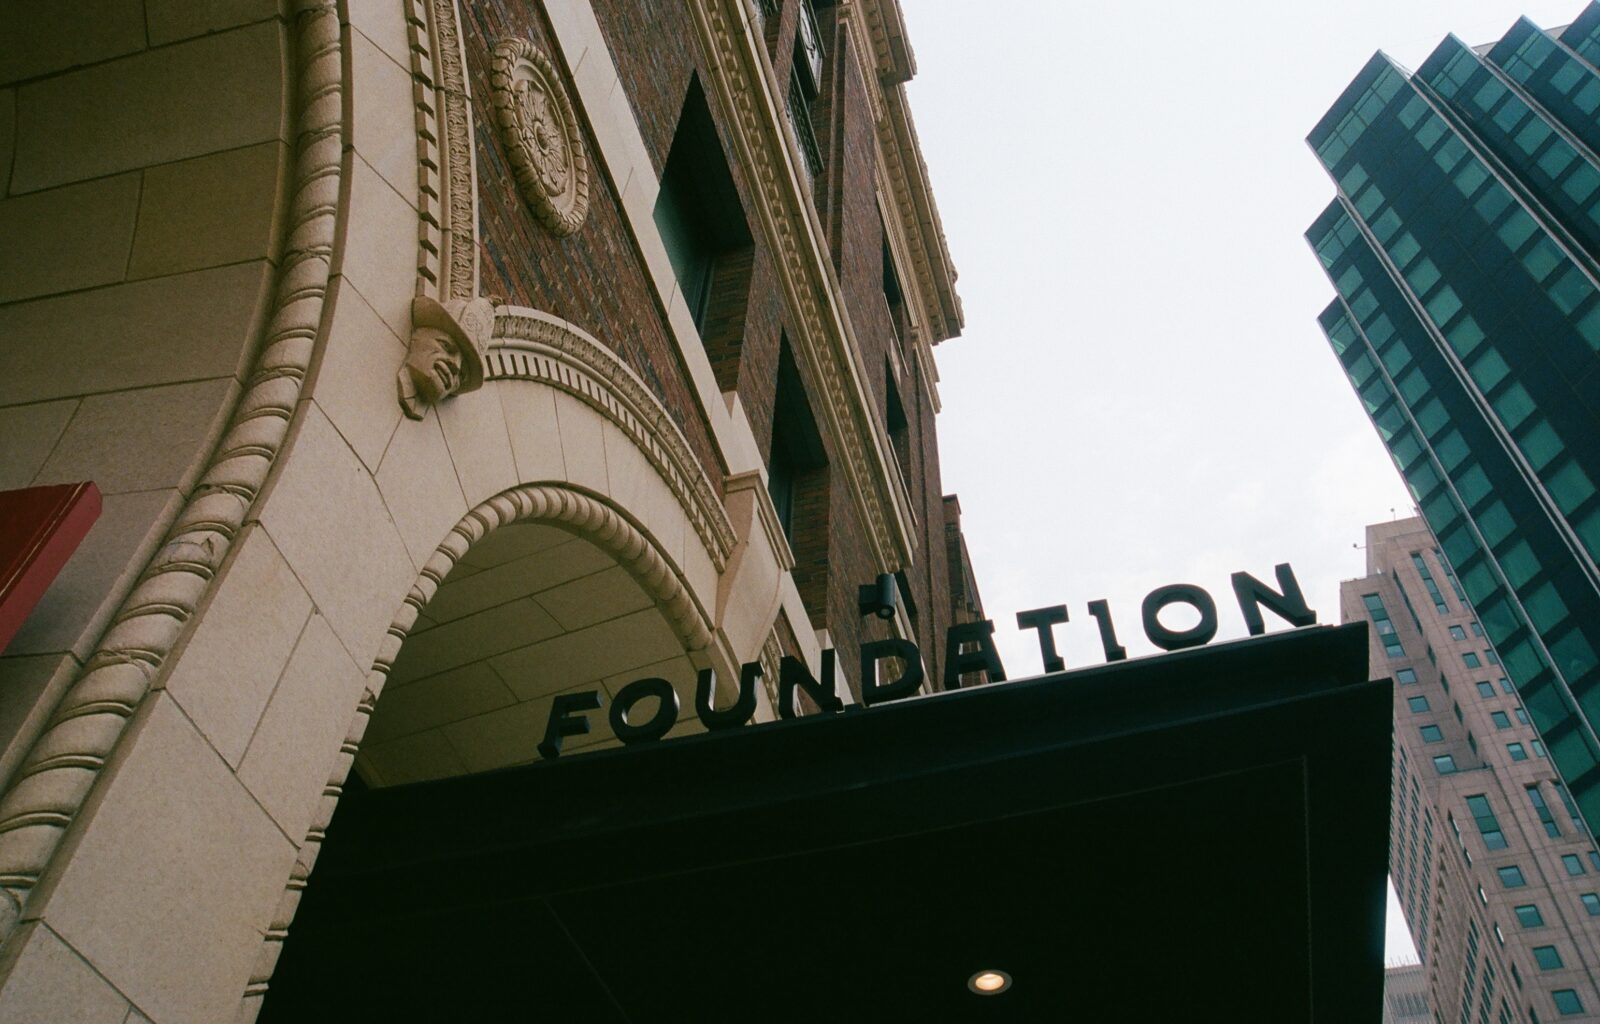 "Foundation" sign atop the entrance of our downtown Detroit hotel